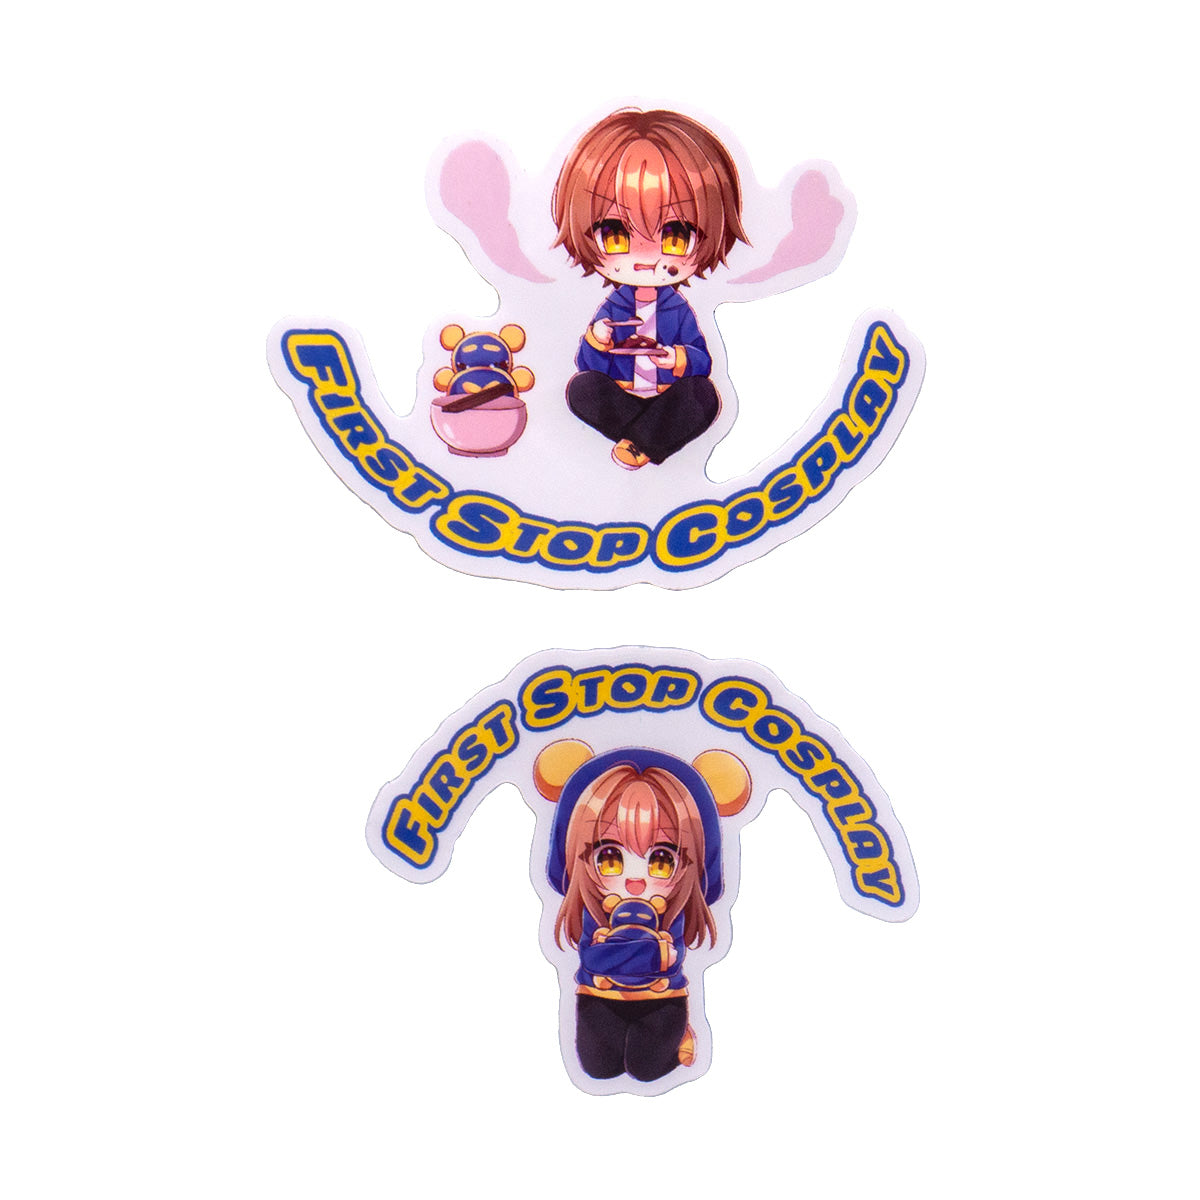 A Dah sticker above a Pan sticker, both with the "First Stop Cosplay" name. Pan is a female character drawn in chibi style. She is holding a small Timmy figure and kneeling on both knees. Dah is a male character in chibi style. He is seated and eating a plate of curry. Next to him is the Timmy figure with a bowl in front.